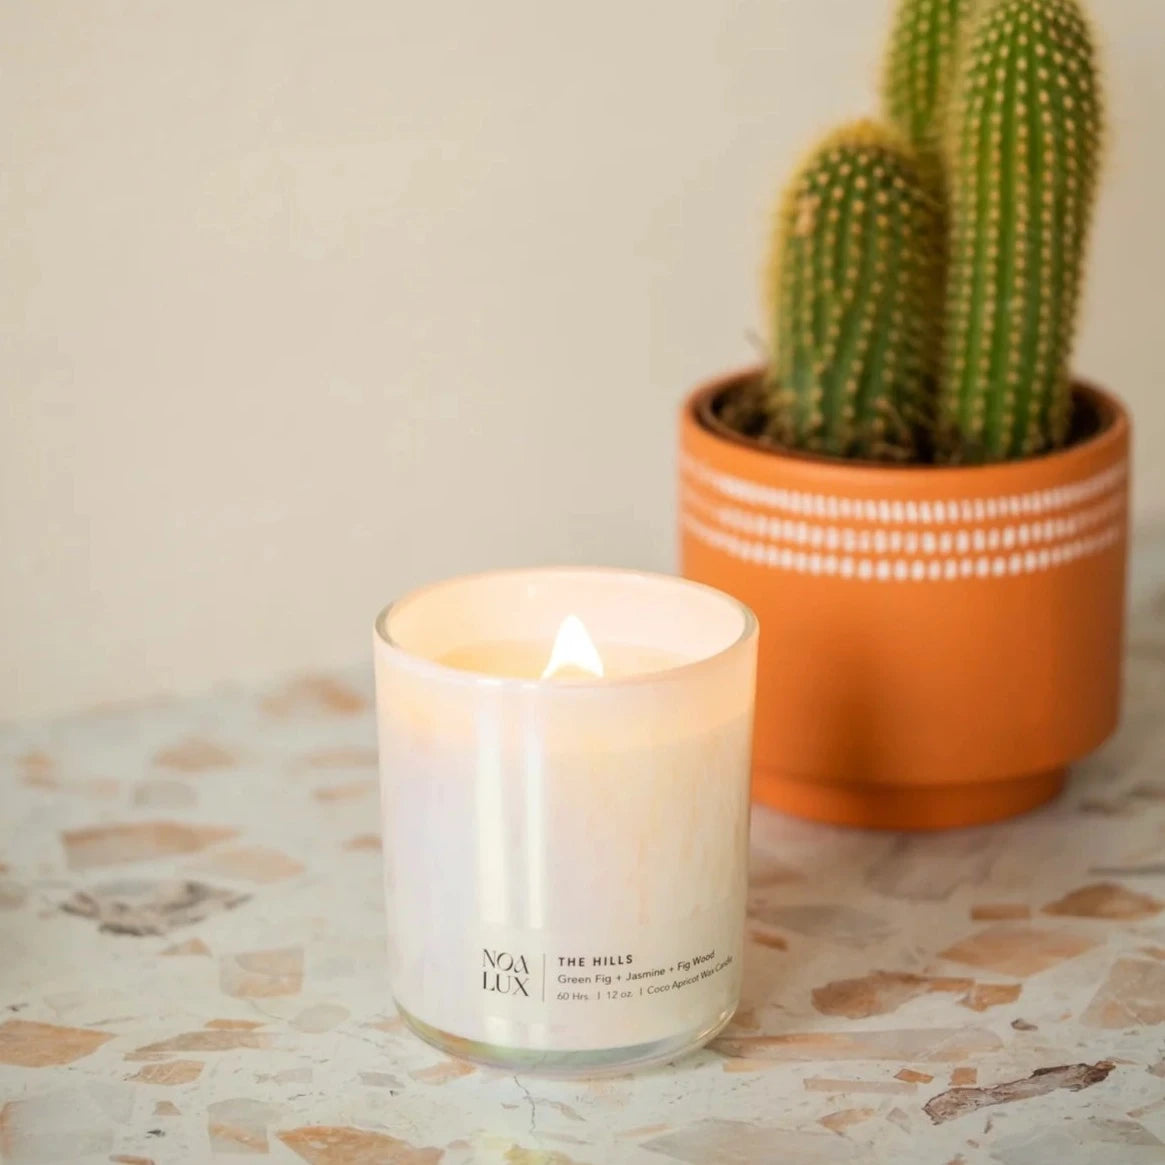 Noa Lux Candle